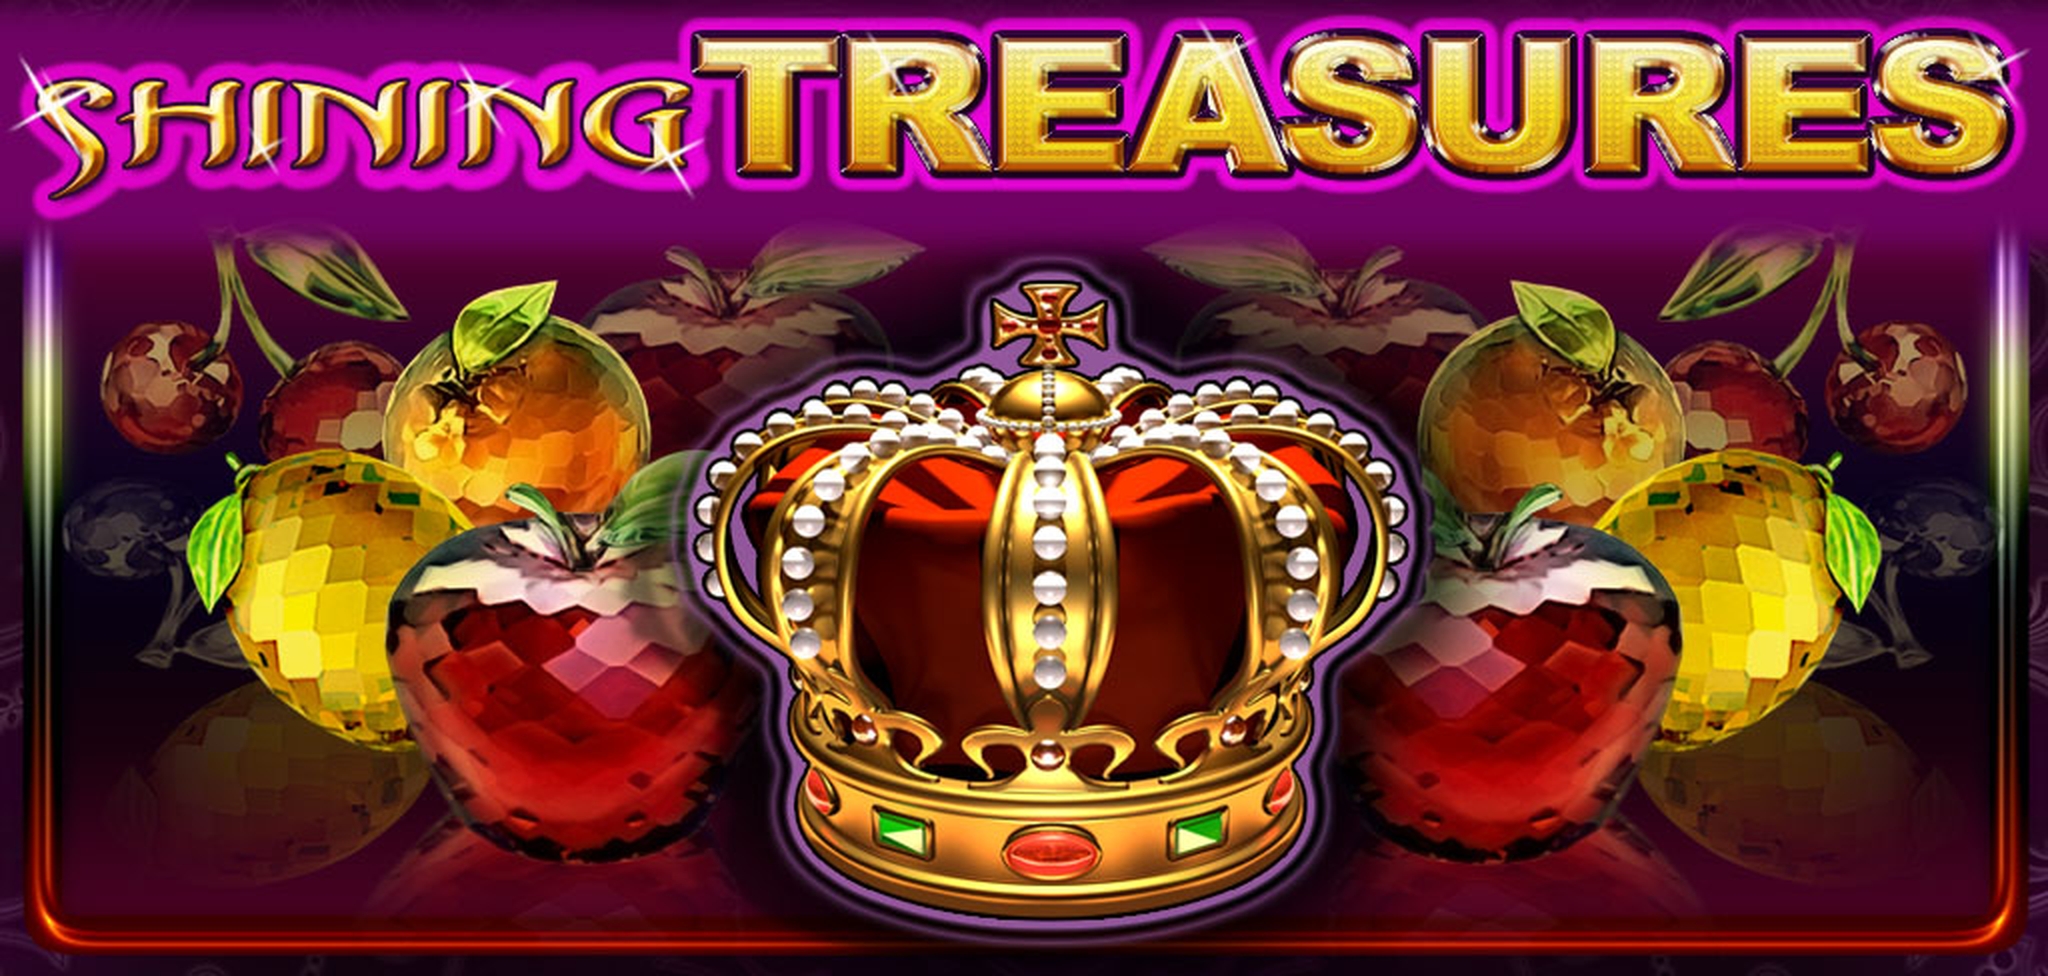 The Shining Treasures Online Slot Demo Game by casino technology